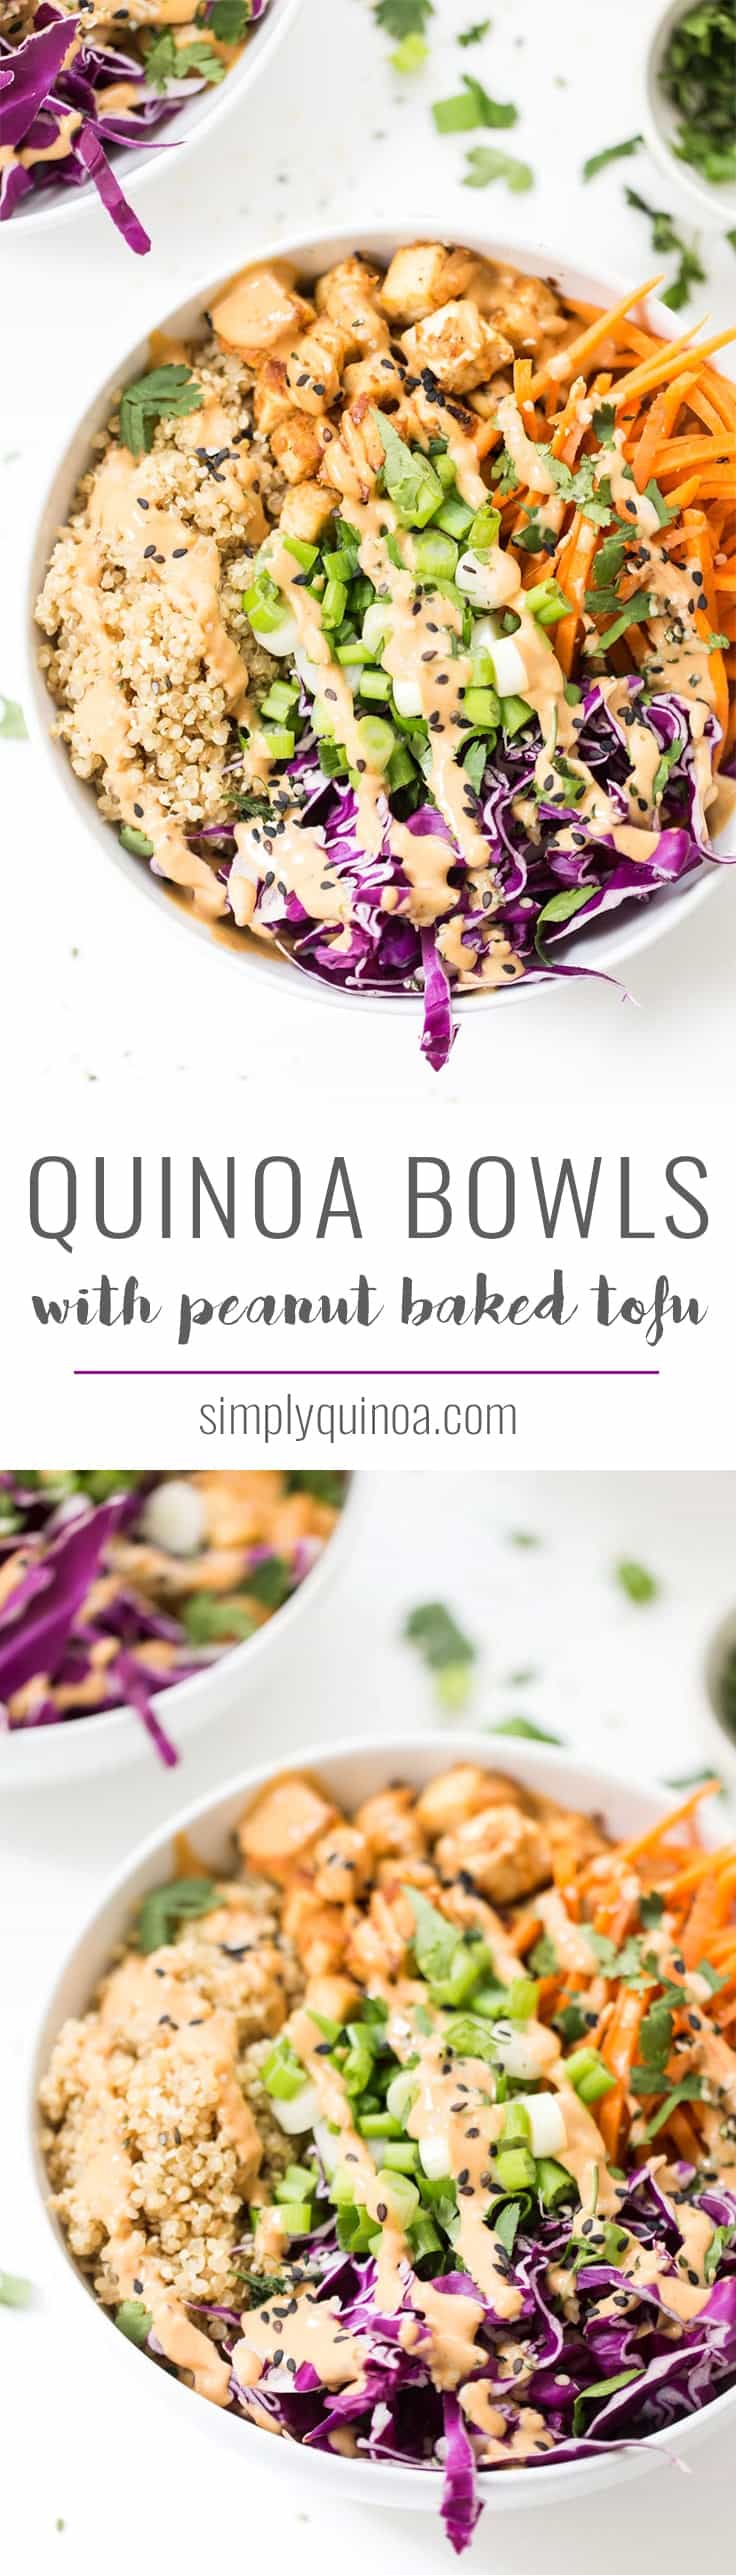 Kick your dinner up a notch with these ASIAN QUINOA BOWLS! With fluffy ginger quinoa, crunchy veggies, crispy baked tofu and a creamy peanut sauce!